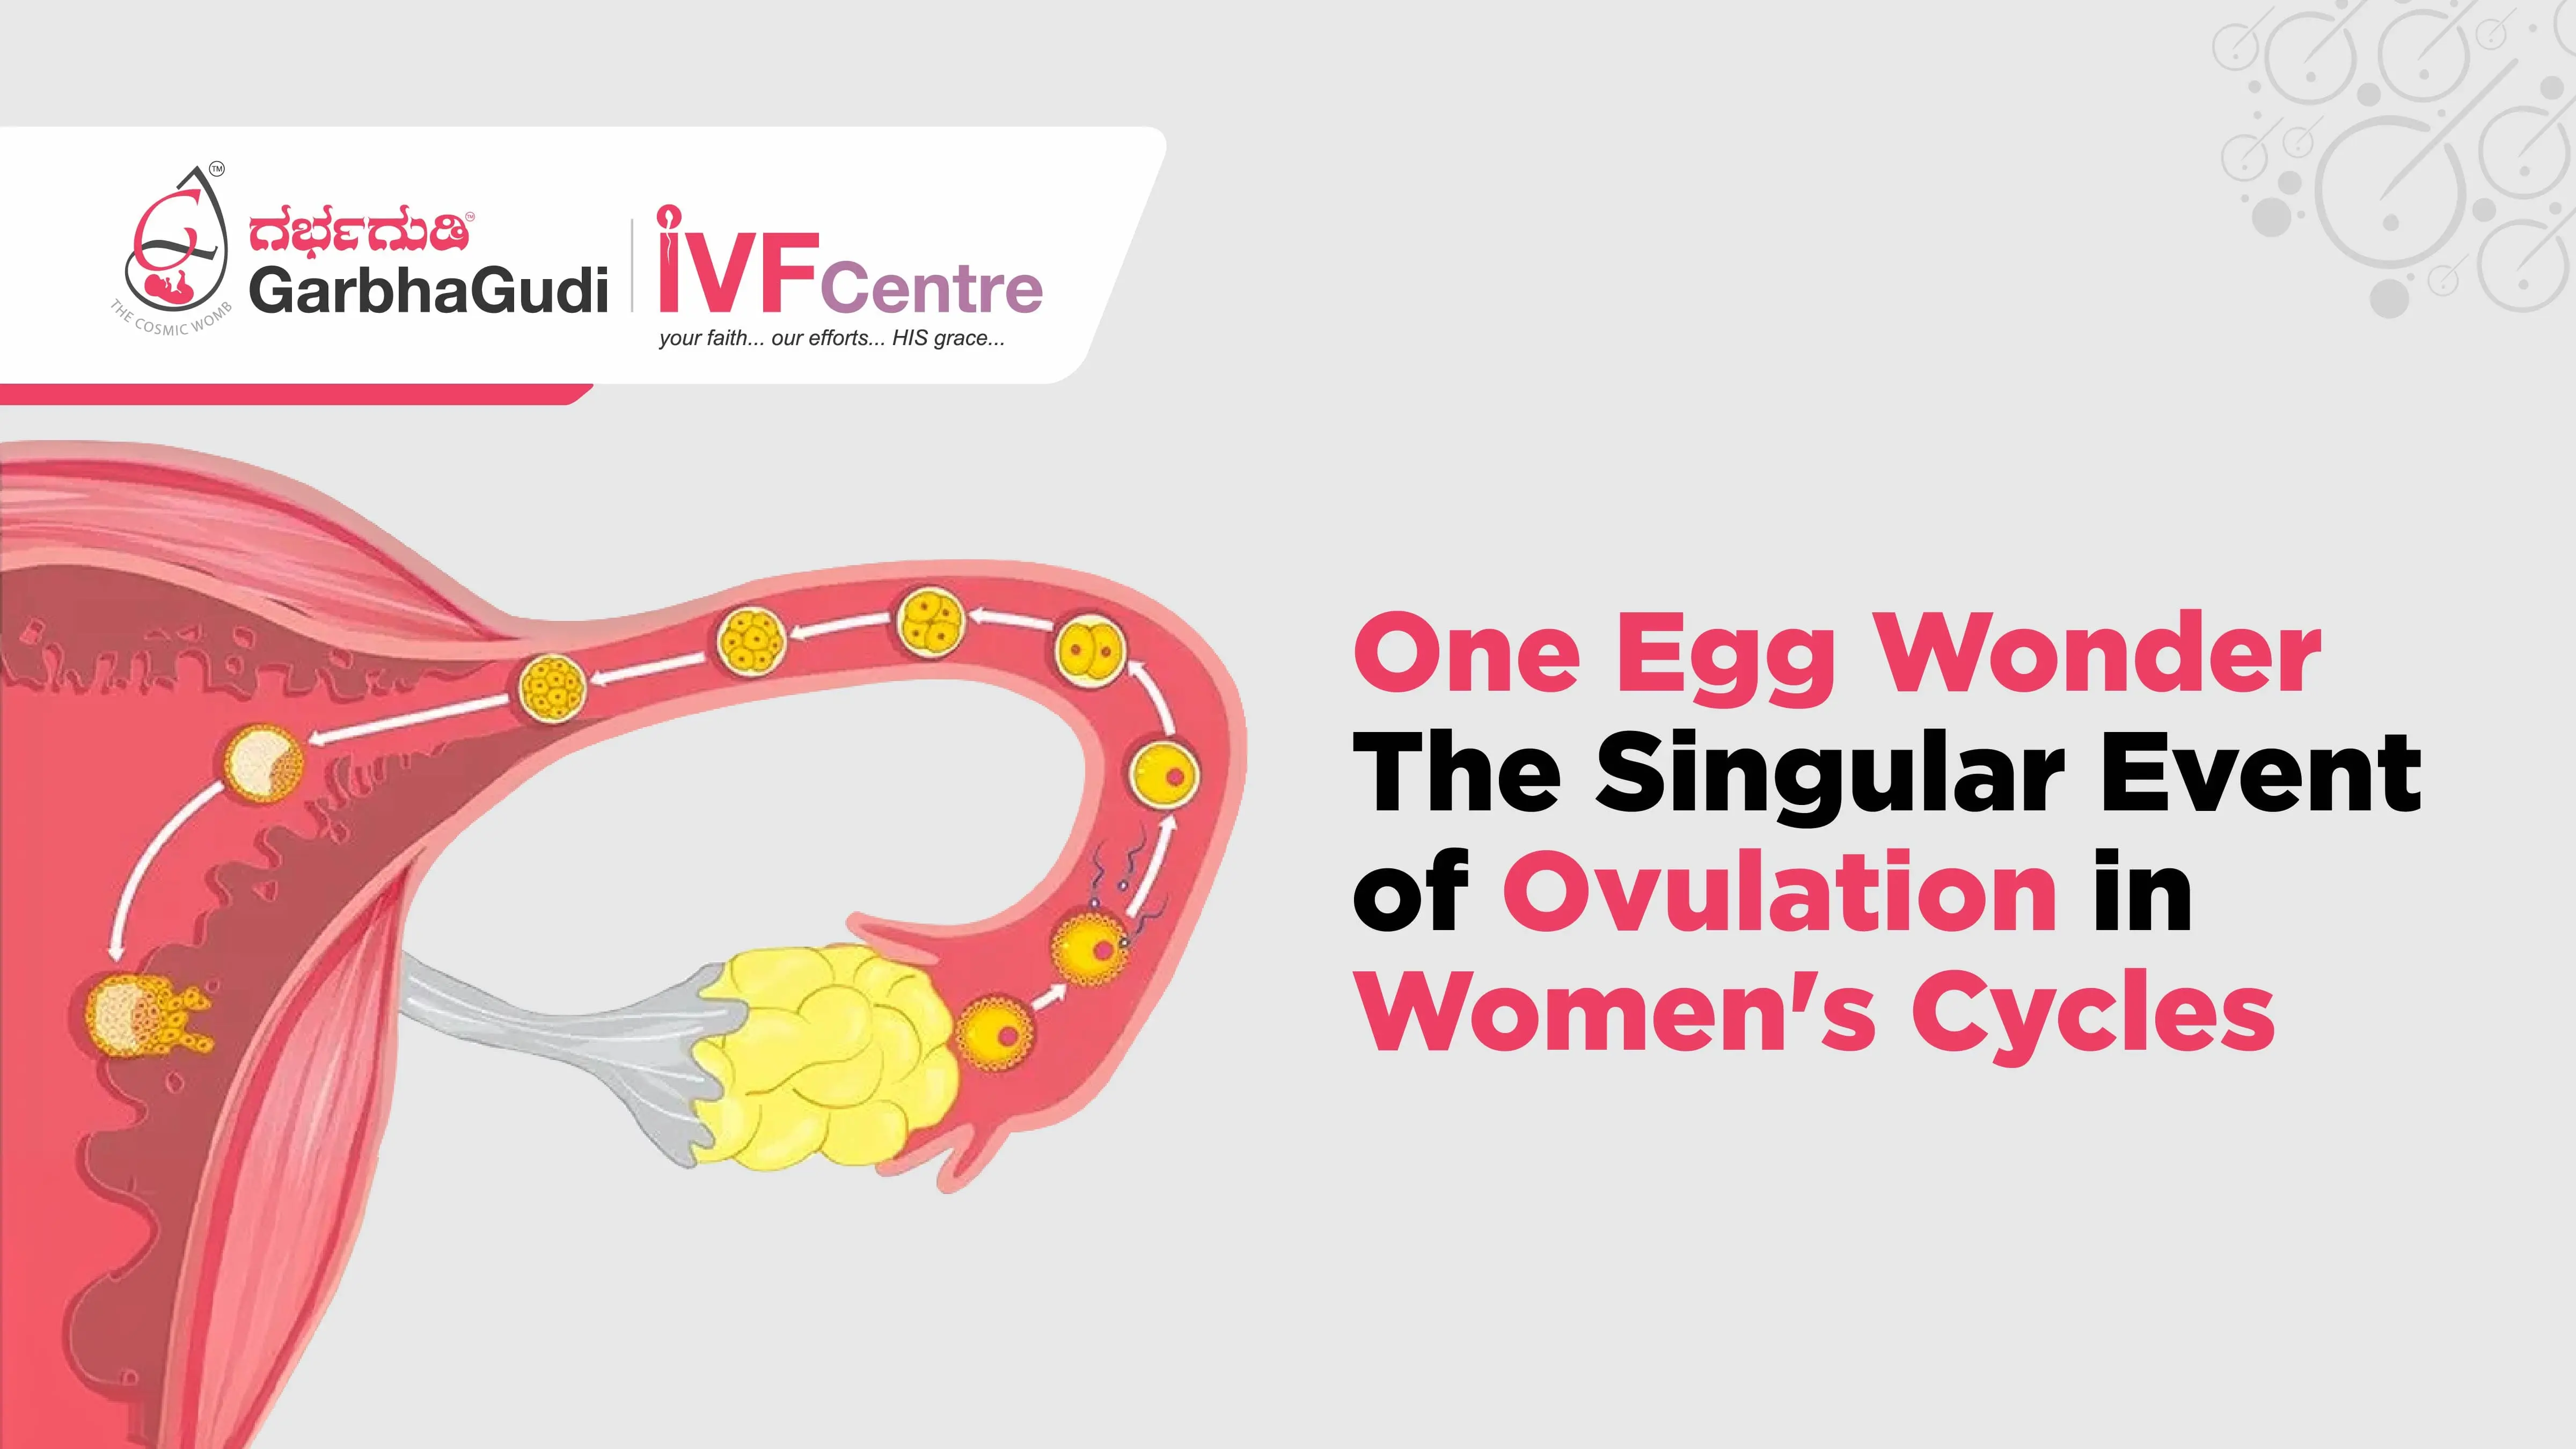 One Egg Wonder: The Singular Event of Ovulation in Women's Cycles